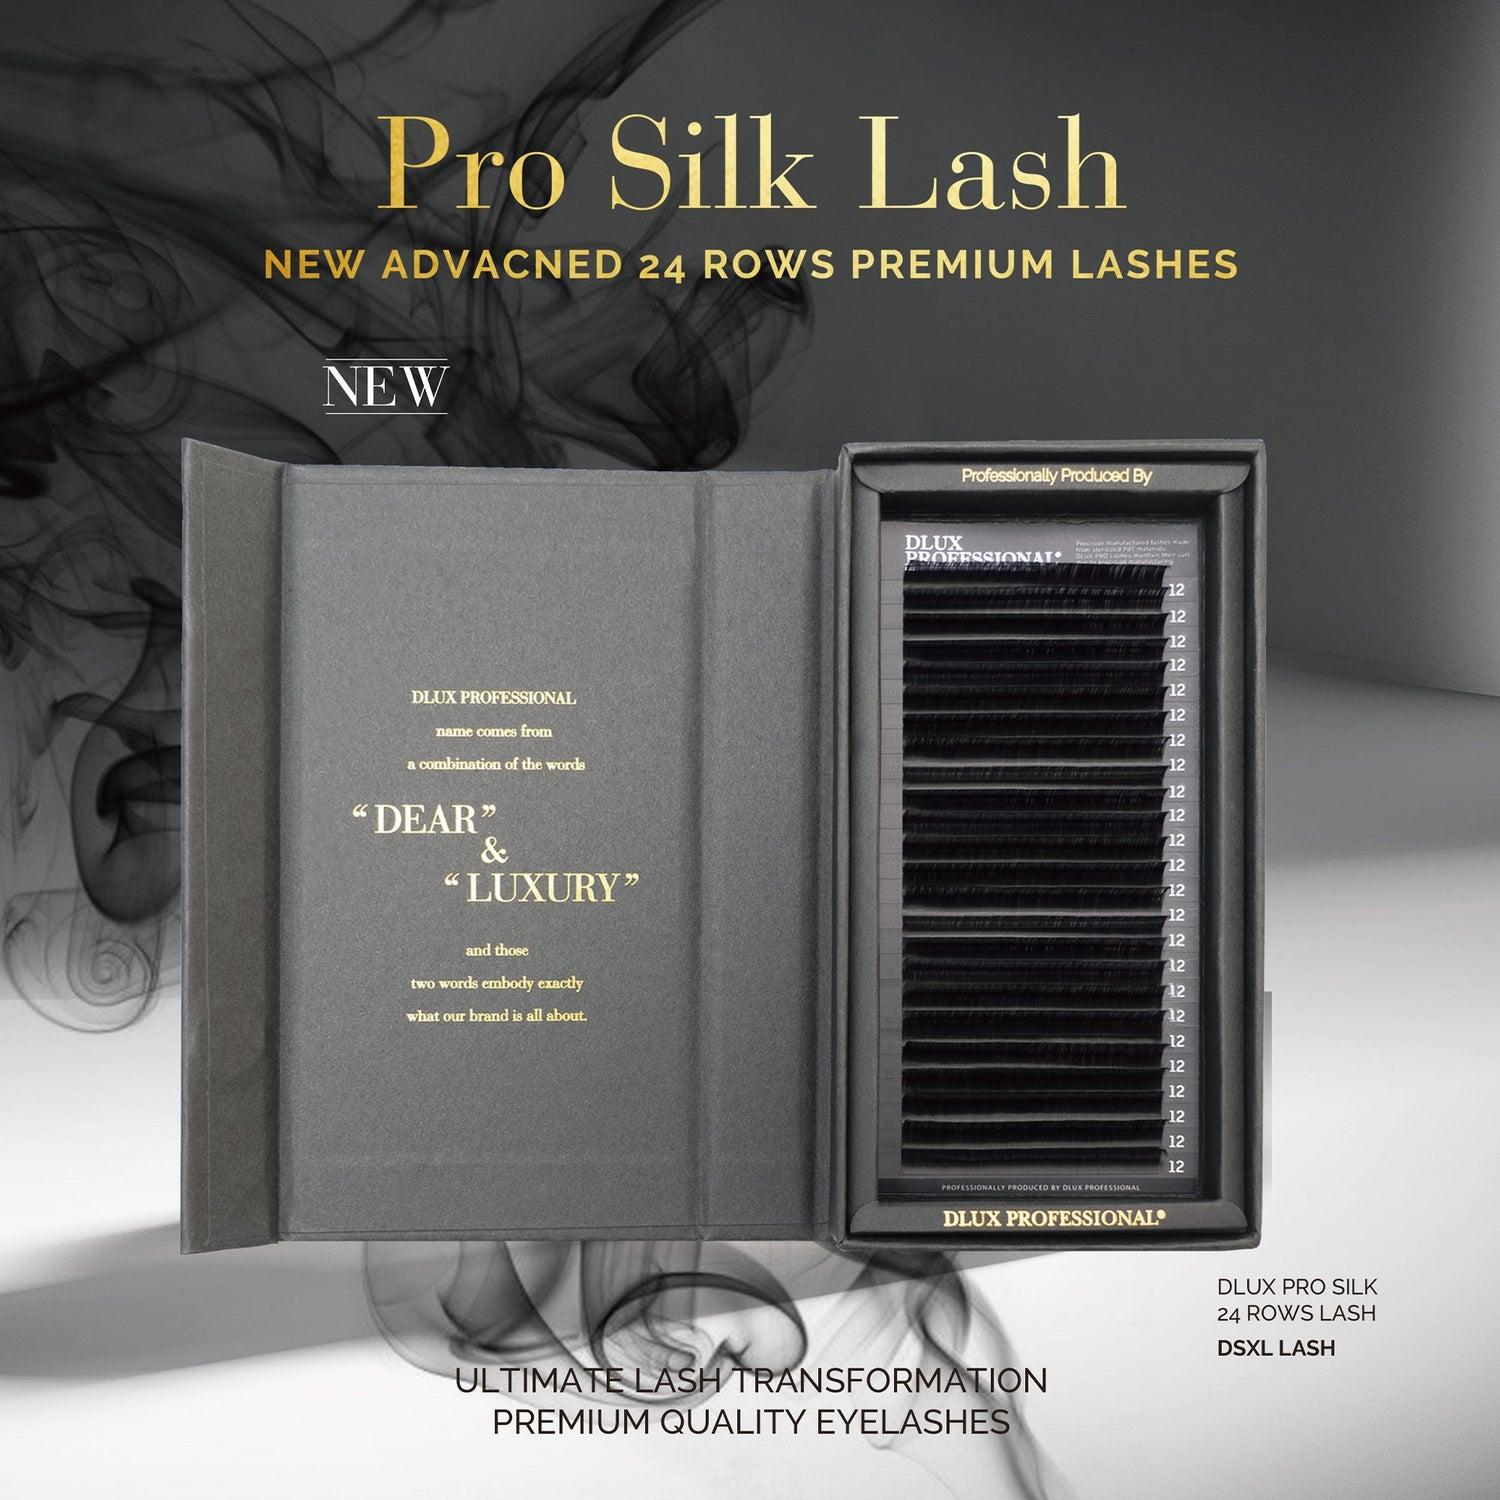 CLASSIC LASHES | Natural lash creating a subtle yet stunning